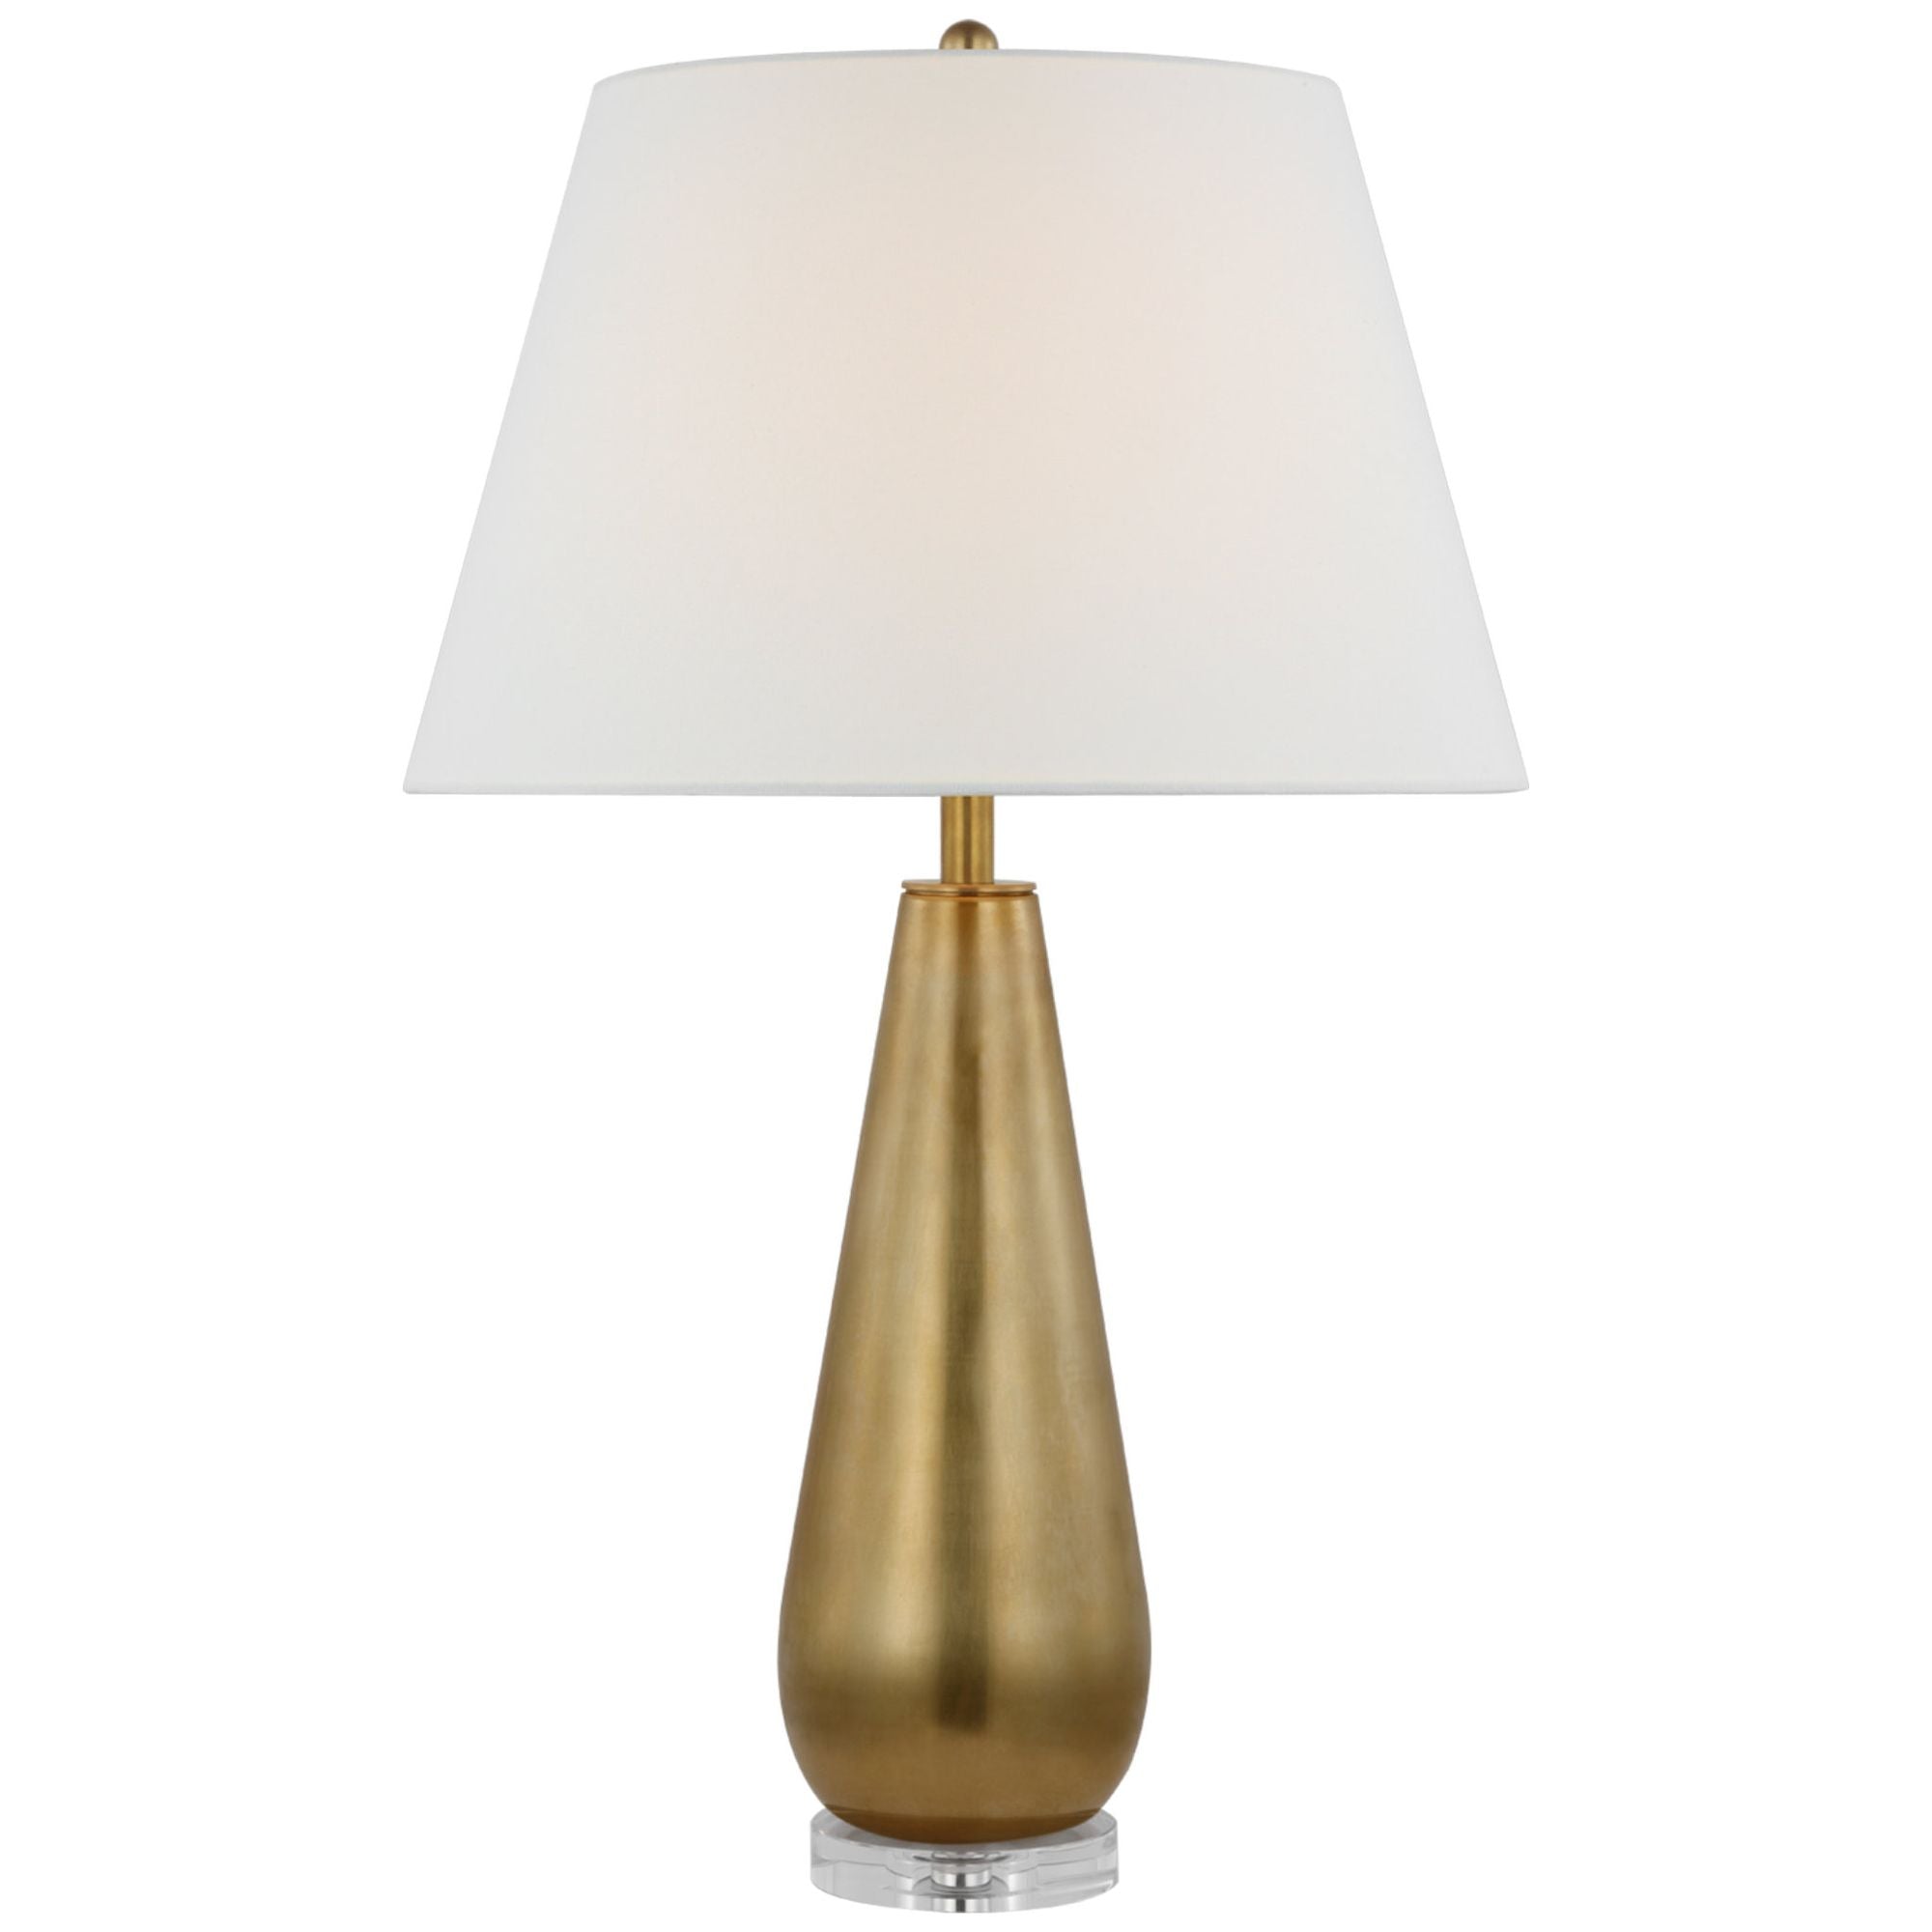 Chapman & Myers Ring Form Large Table Lamp in Antique-Burnished Brass